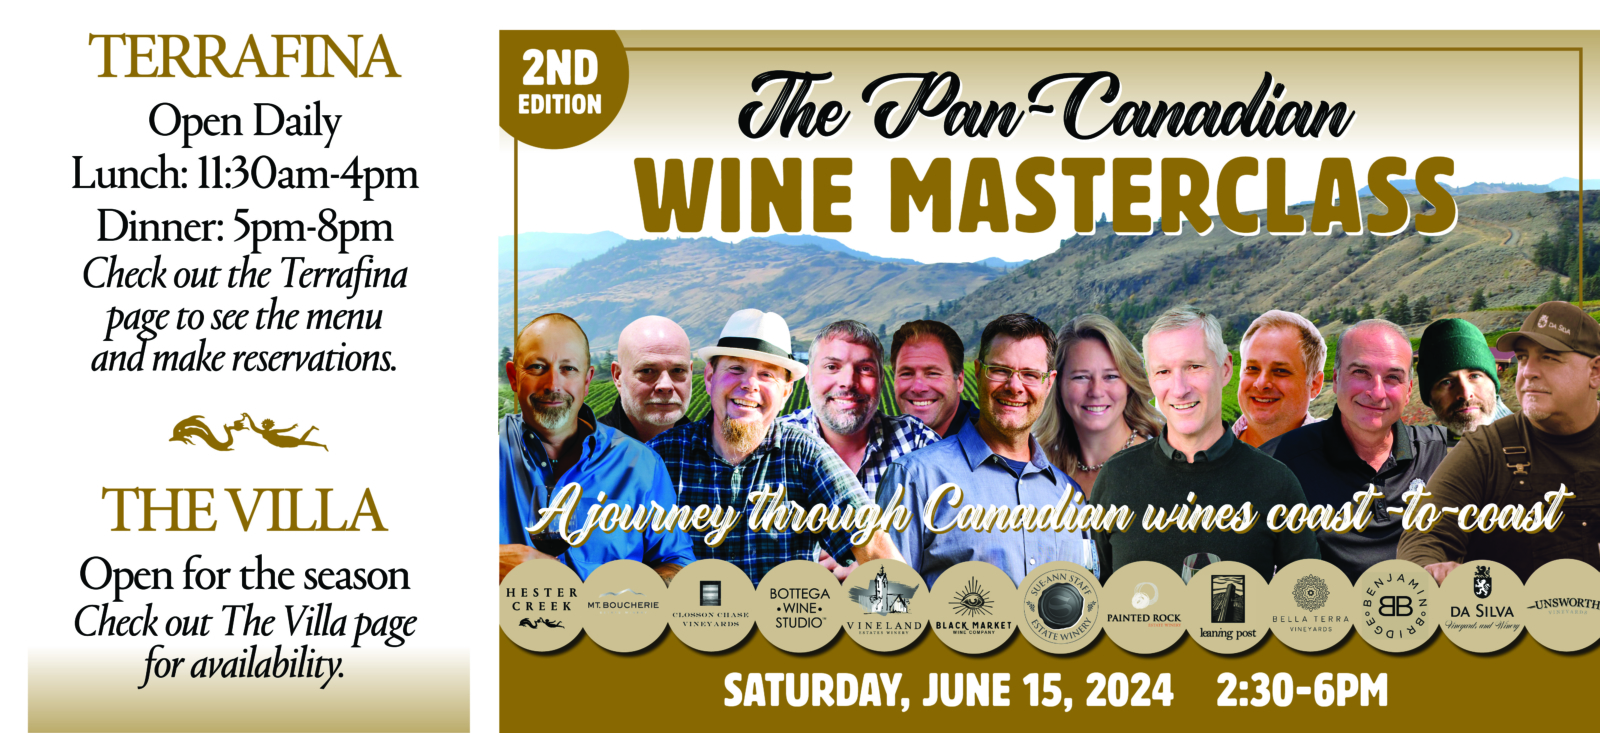 Pan Canadian Wine Masterclass by Carl's Wine Club and Hester Creek Estate Winery